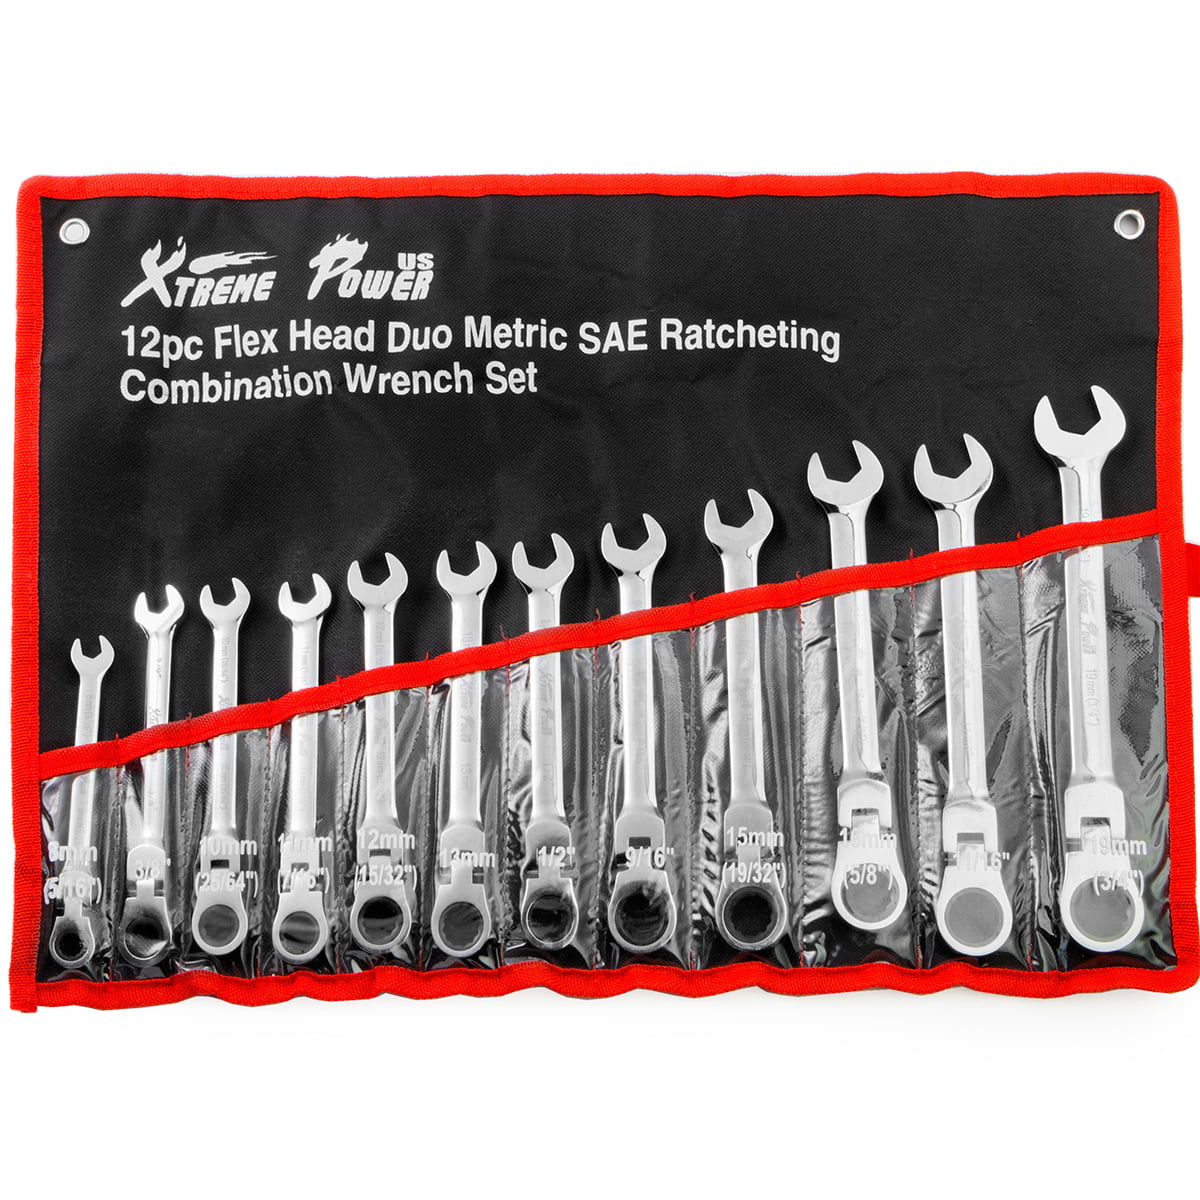 Pro Flexible Combination Spanners Ratchet Wrench Metric Handheld Tools Set